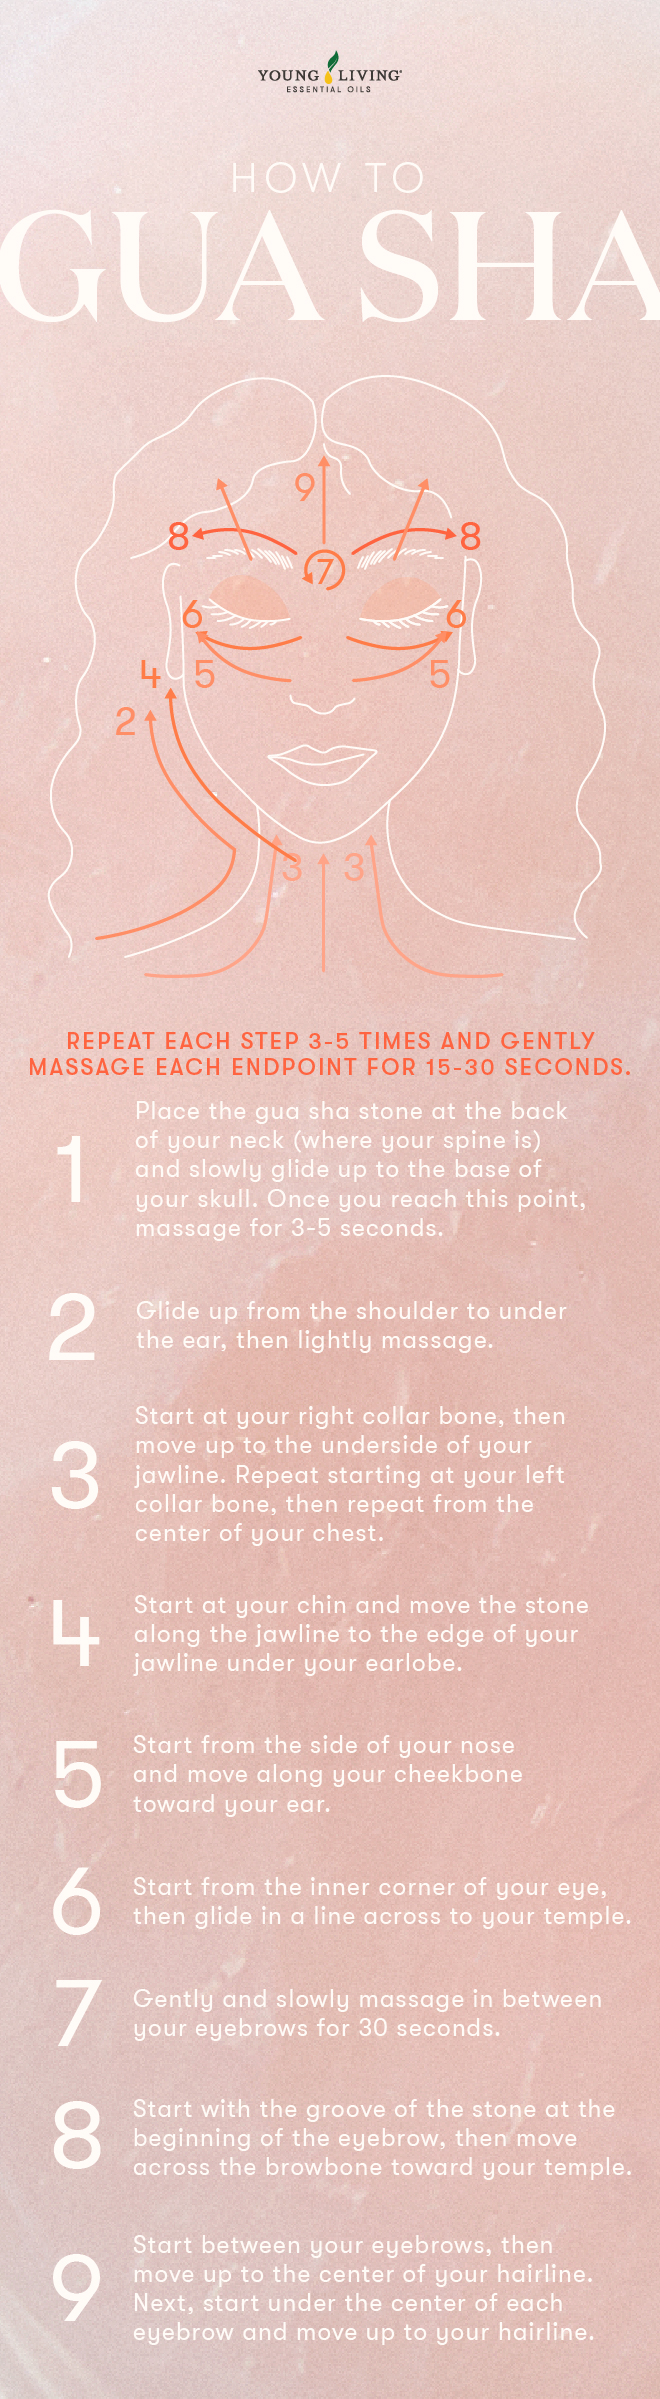 How to gua sha infographic - Young Living Lavender Life Blog